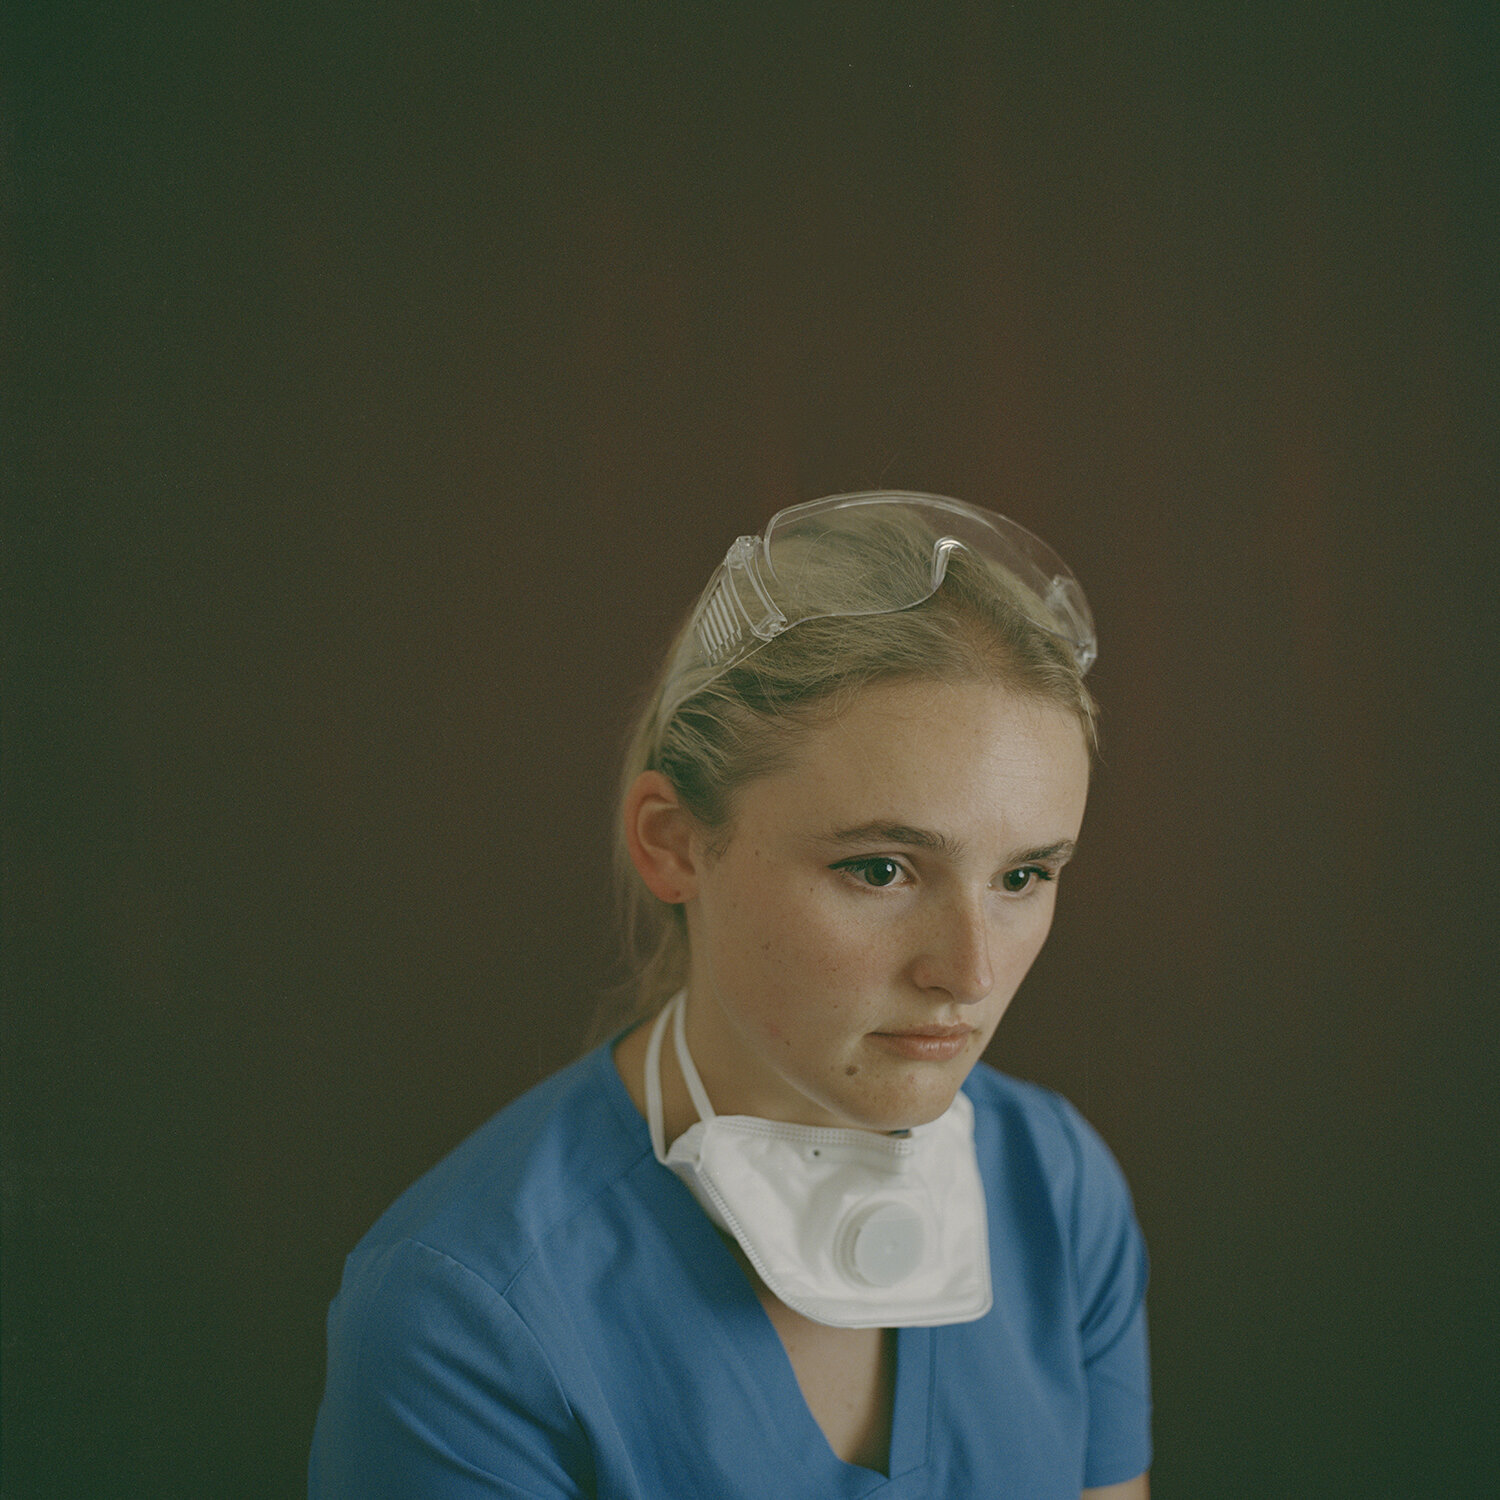  Phoebe Theodora is a photographer. Her work has twice been selected for the Taylor Wessing Portrait Prize at the National Portrait Gallery in London. She lives in Mexico City. 